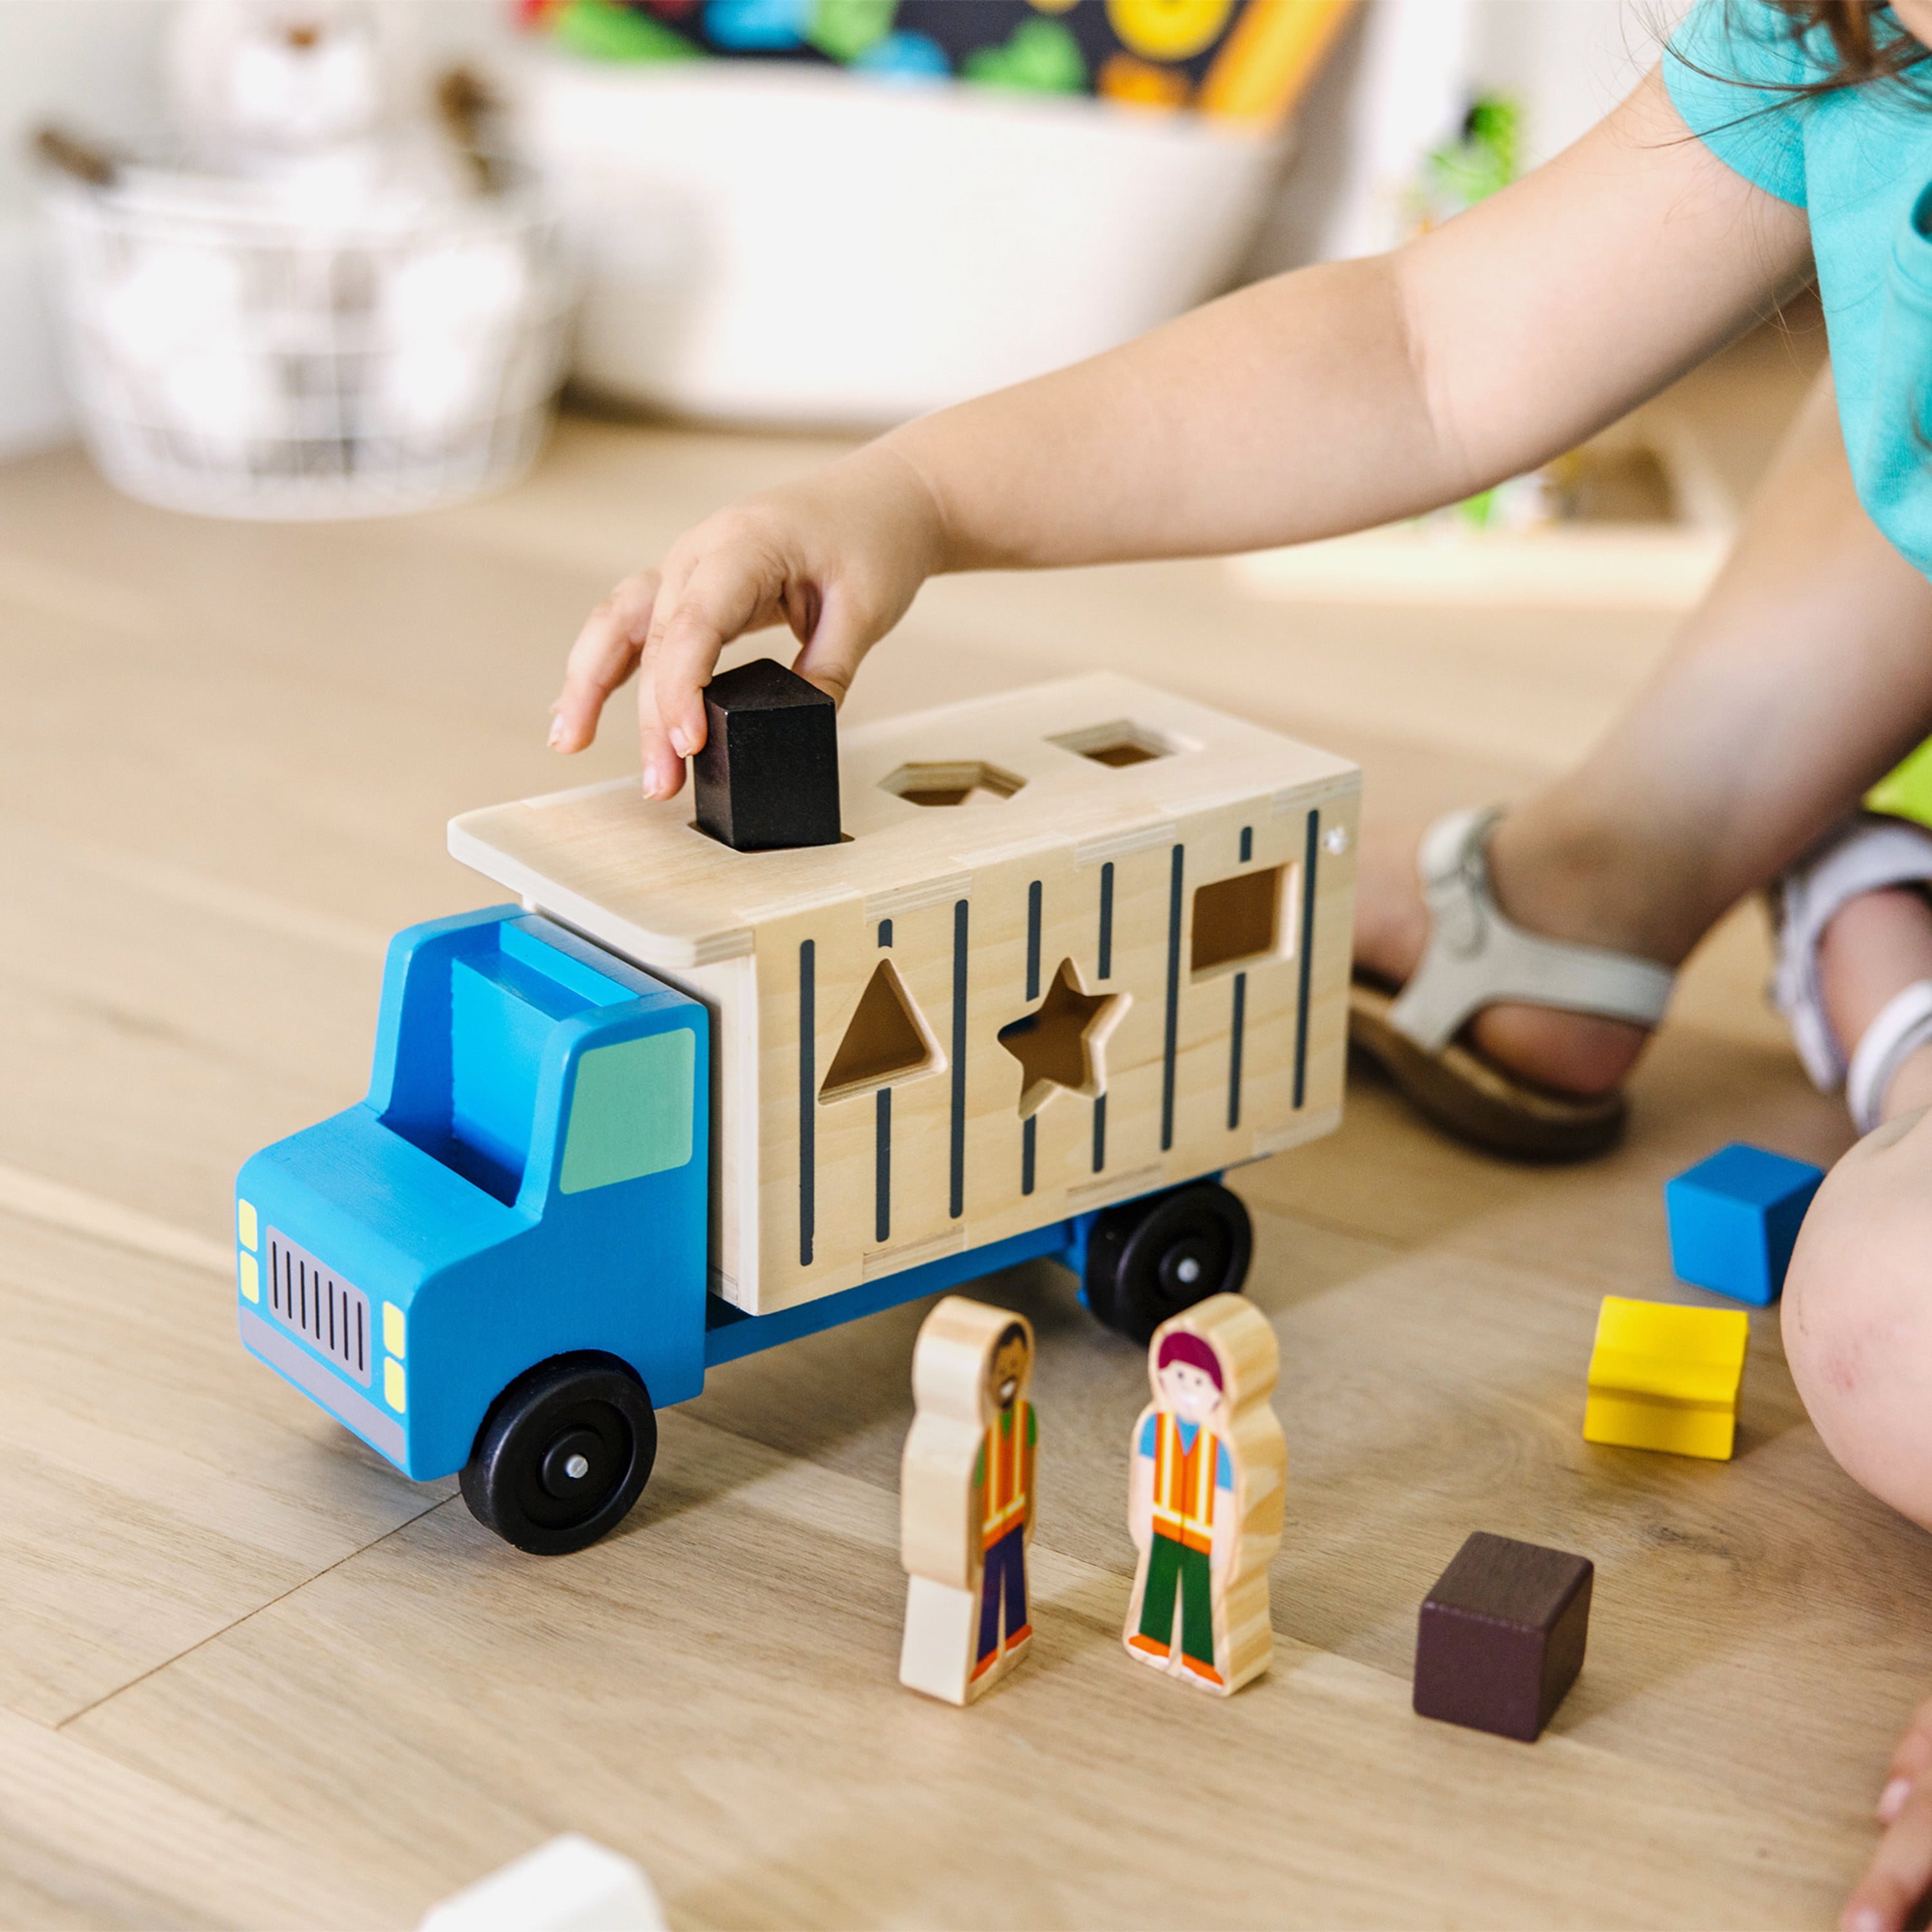 Melissa & Doug Shape-Sorting Wooden Dump Truck Toy Quality Craftsmanship, 9 Colorful Shapes and 2 Play Figures 